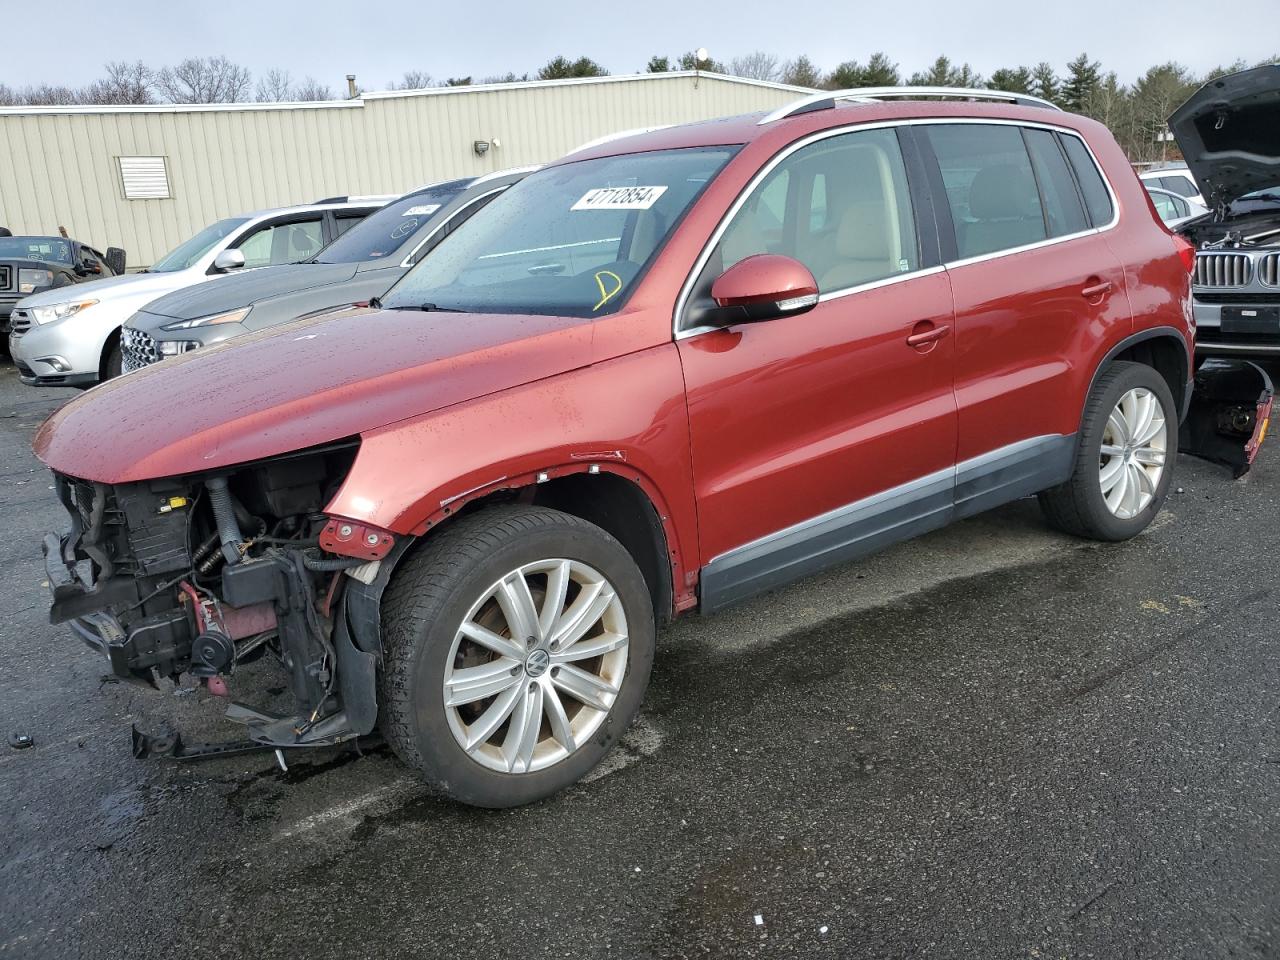 vin: WVGBV7AX3GW022611 WVGBV7AX3GW022611 2016 volkswagen tiguan 2000 for Sale in 02822 2000, Ri - Exeter, Exeter, Rhode Island, USA